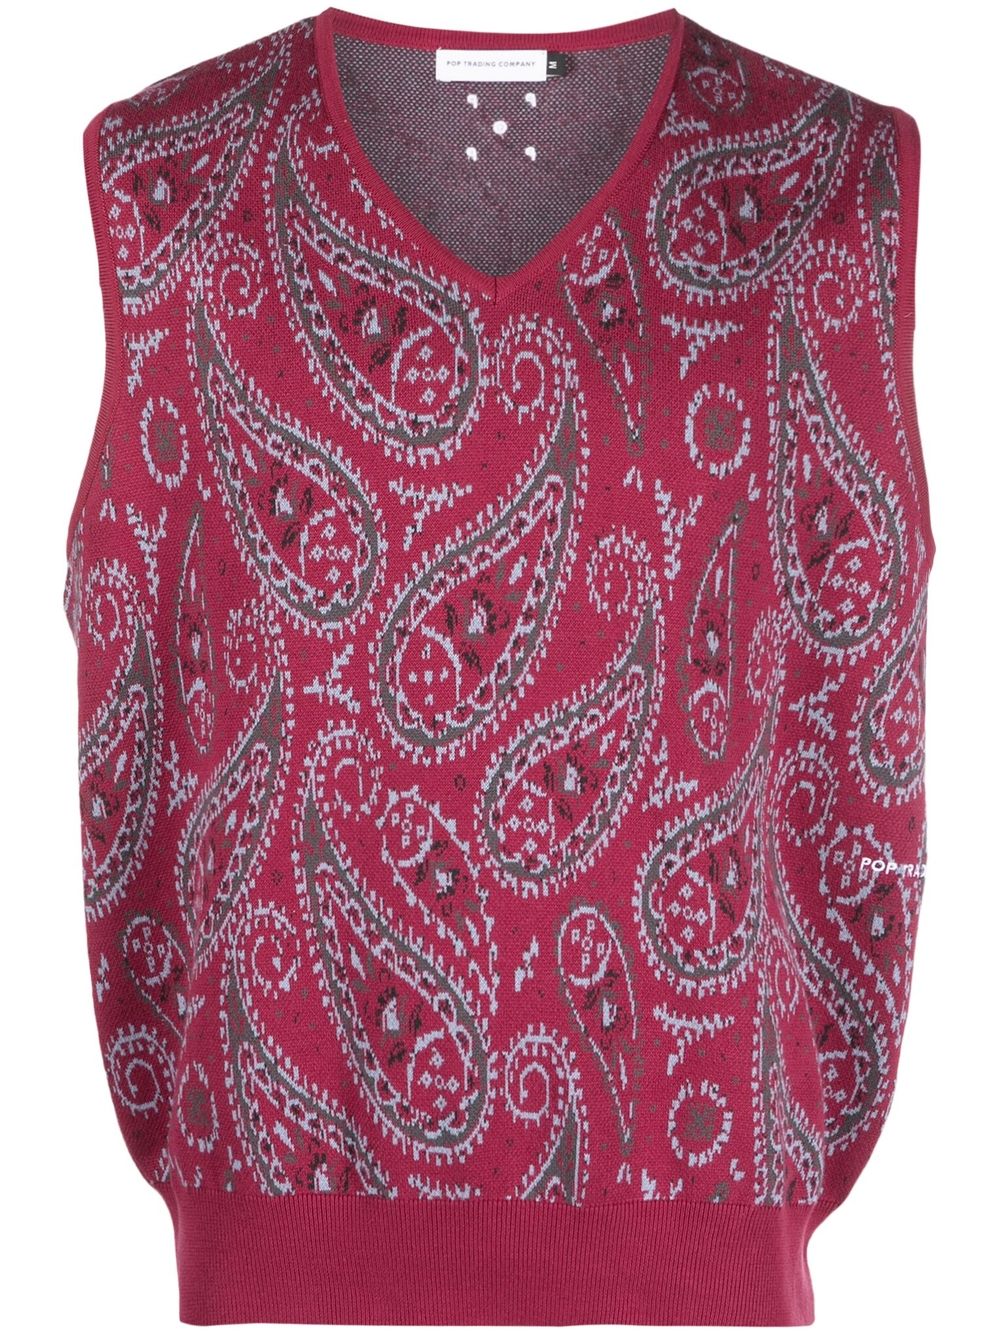 Pop Trading Company Knitted Paisley Vest - Farfetch